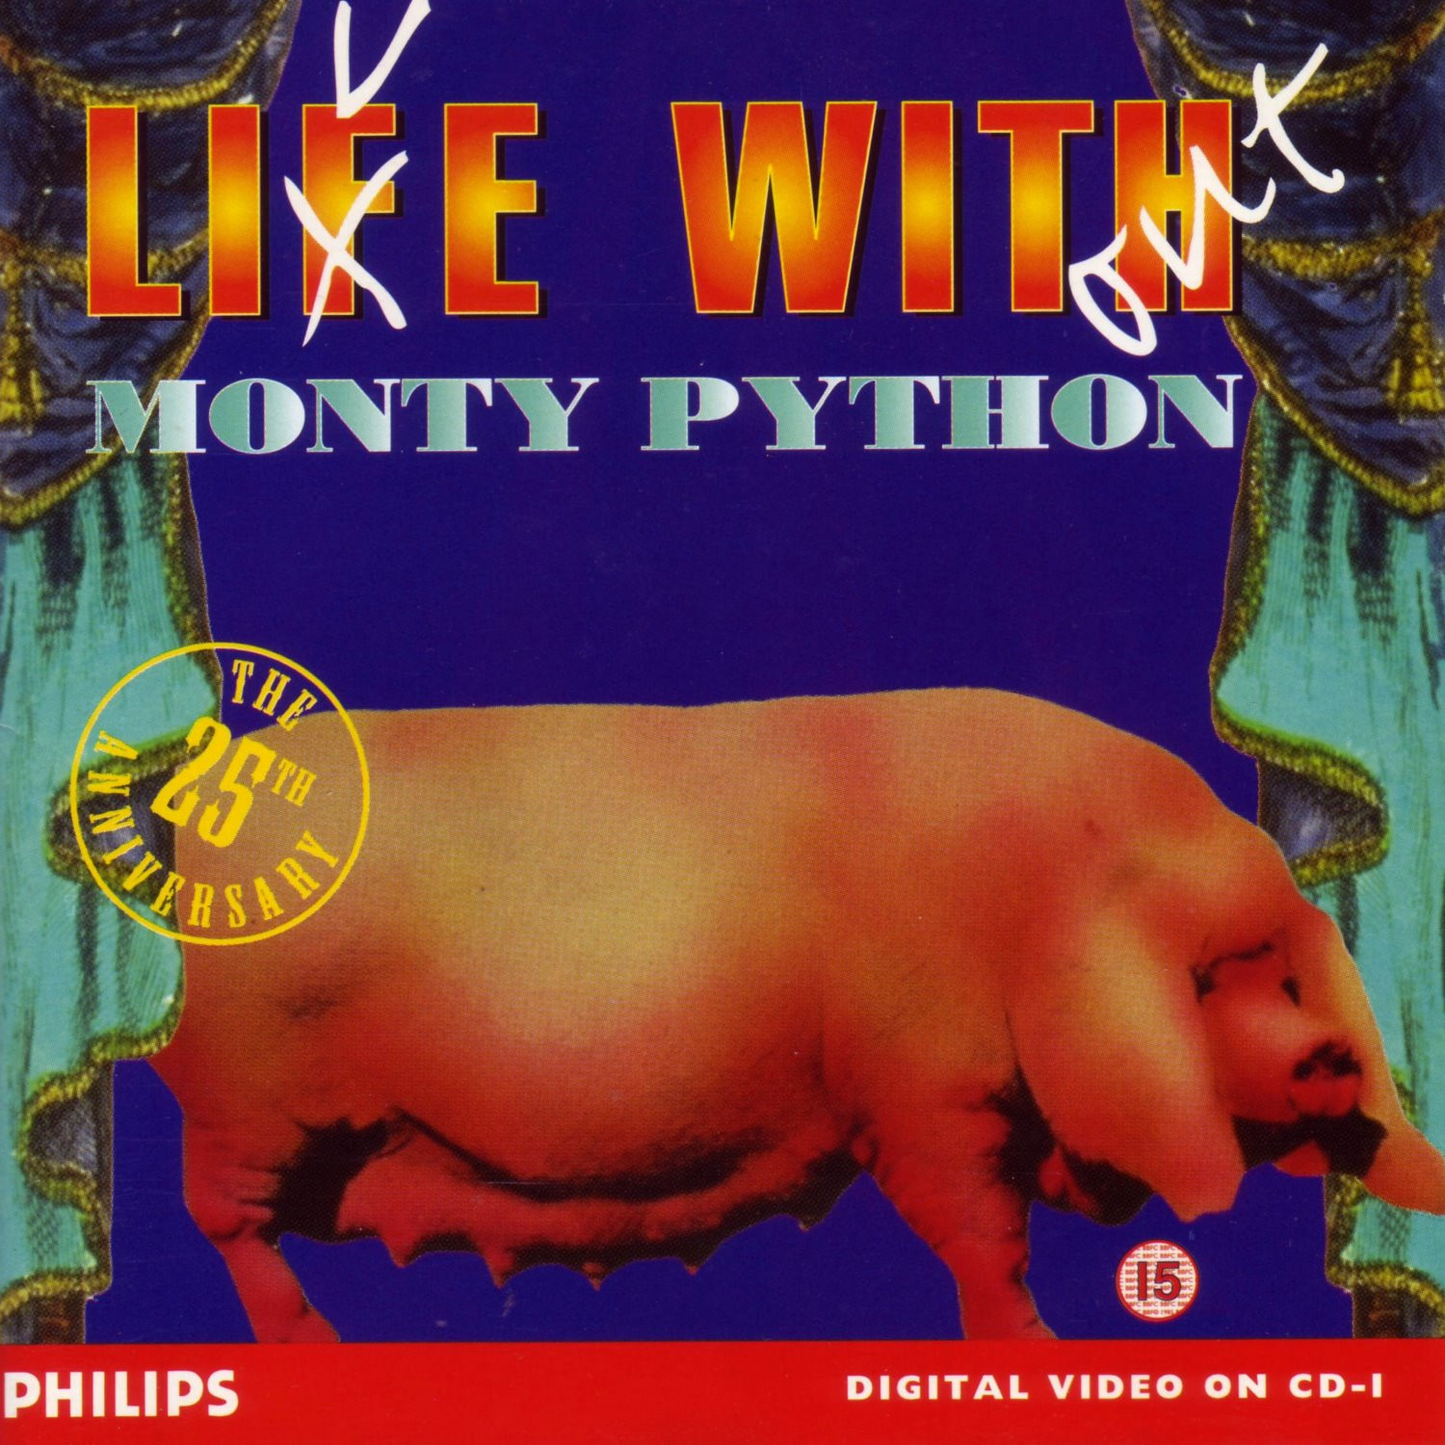 Live With(out) Monty Python - CD-i